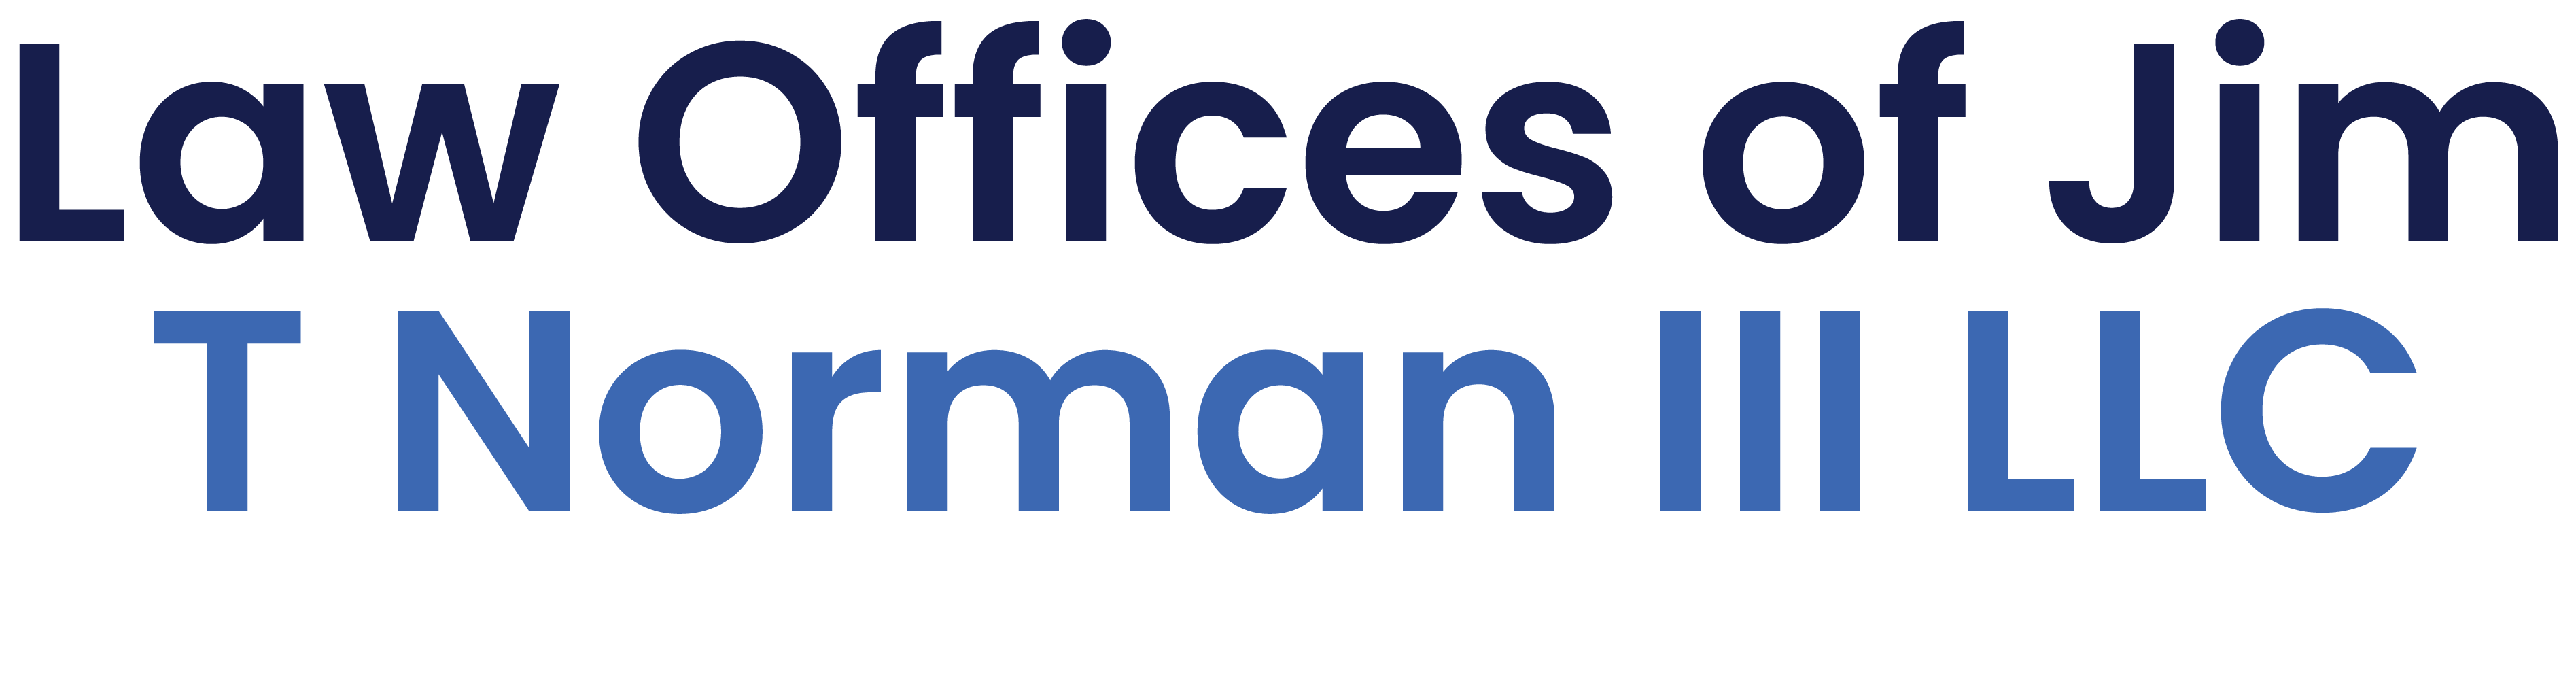 Law Offices of Jim T Norman III LLC